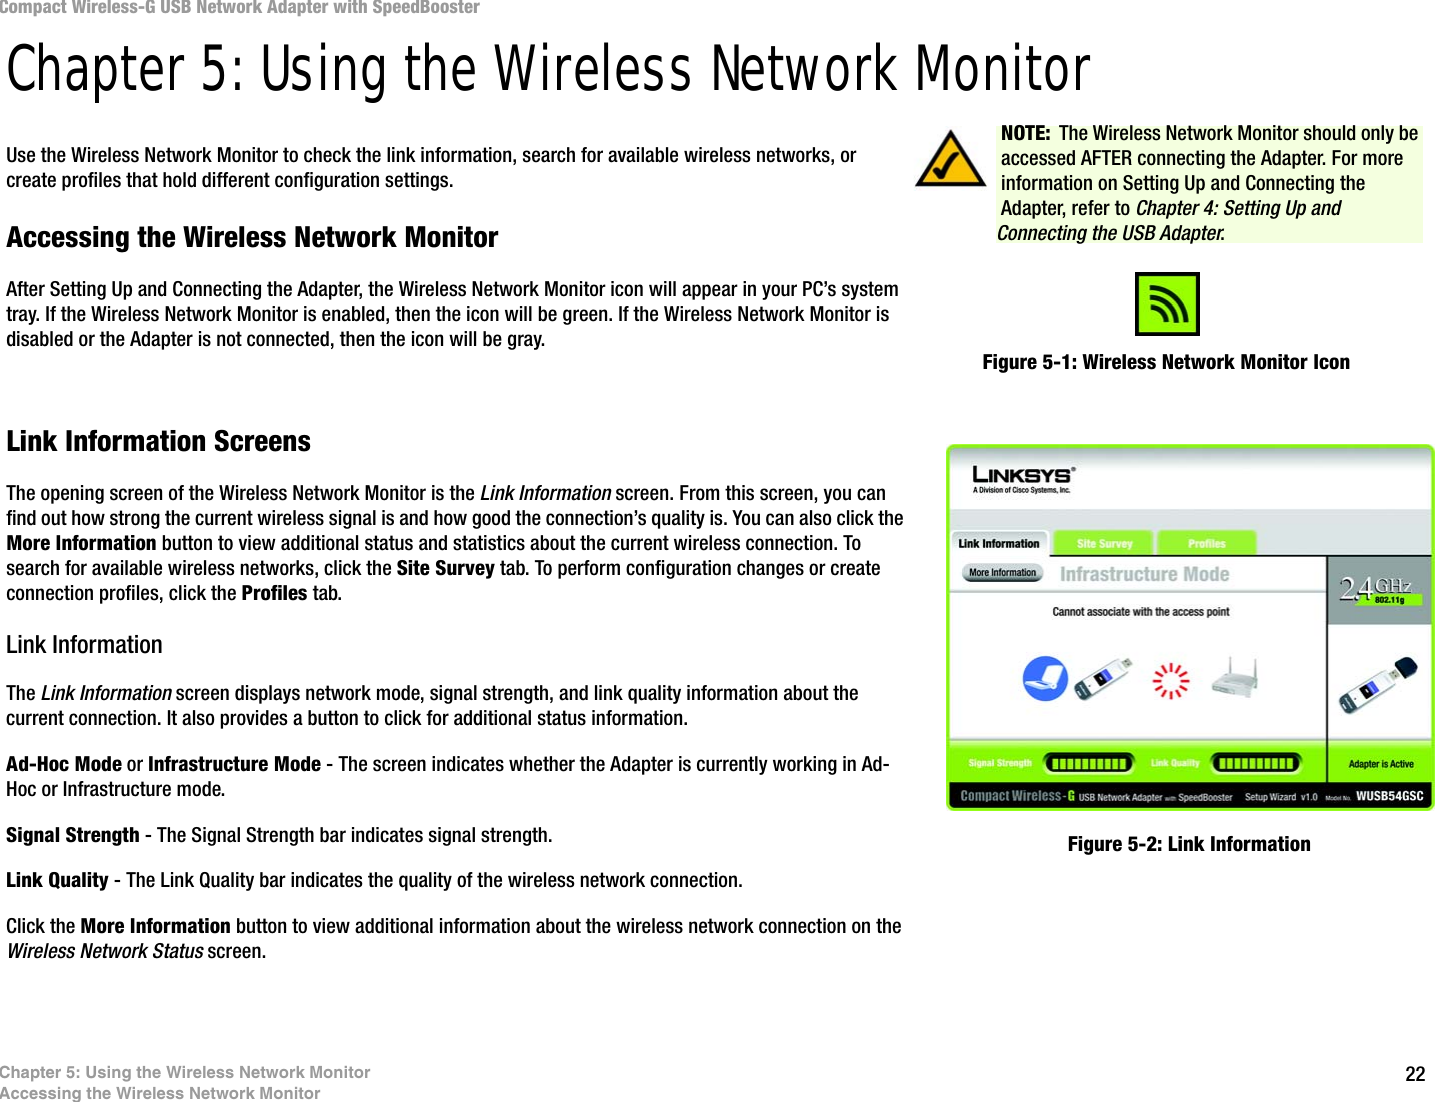 22Chapter 5: Using the Wireless Network MonitorAccessing the Wireless Network MonitorCompact Wireless-G USB Network Adapter with SpeedBoosterChapter 5: Using the Wireless Network MonitorUse the Wireless Network Monitor to check the link information, search for available wireless networks, or create profiles that hold different configuration settings.Accessing the Wireless Network MonitorAfter Setting Up and Connecting the Adapter, the Wireless Network Monitor icon will appear in your PC’s system tray. If the Wireless Network Monitor is enabled, then the icon will be green. If the Wireless Network Monitor is disabled or the Adapter is not connected, then the icon will be gray.Link Information ScreensThe opening screen of the Wireless Network Monitor is the Link Information screen. From this screen, you can find out how strong the current wireless signal is and how good the connection’s quality is. You can also click the More Information button to view additional status and statistics about the current wireless connection. To search for available wireless networks, click the Site Survey tab. To perform configuration changes or create connection profiles, click the Profiles tab.Link InformationThe Link Information screen displays network mode, signal strength, and link quality information about the current connection. It also provides a button to click for additional status information.Ad-Hoc Mode or Infrastructure Mode - The screen indicates whether the Adapter is currently working in Ad-Hoc or Infrastructure mode.Signal Strength - The Signal Strength bar indicates signal strength. Link Quality - The Link Quality bar indicates the quality of the wireless network connection.Click the More Information button to view additional information about the wireless network connection on the Wireless Network Status screen.Figure 5-1: Wireless Network Monitor IconFigure 5-2: Link InformationNOTE: The Wireless Network Monitor should only be accessed AFTER connecting the Adapter. For more information on Setting Up and Connecting the Adapter, refer to Chapter 4: Setting Up and Connecting the USB Adapter.